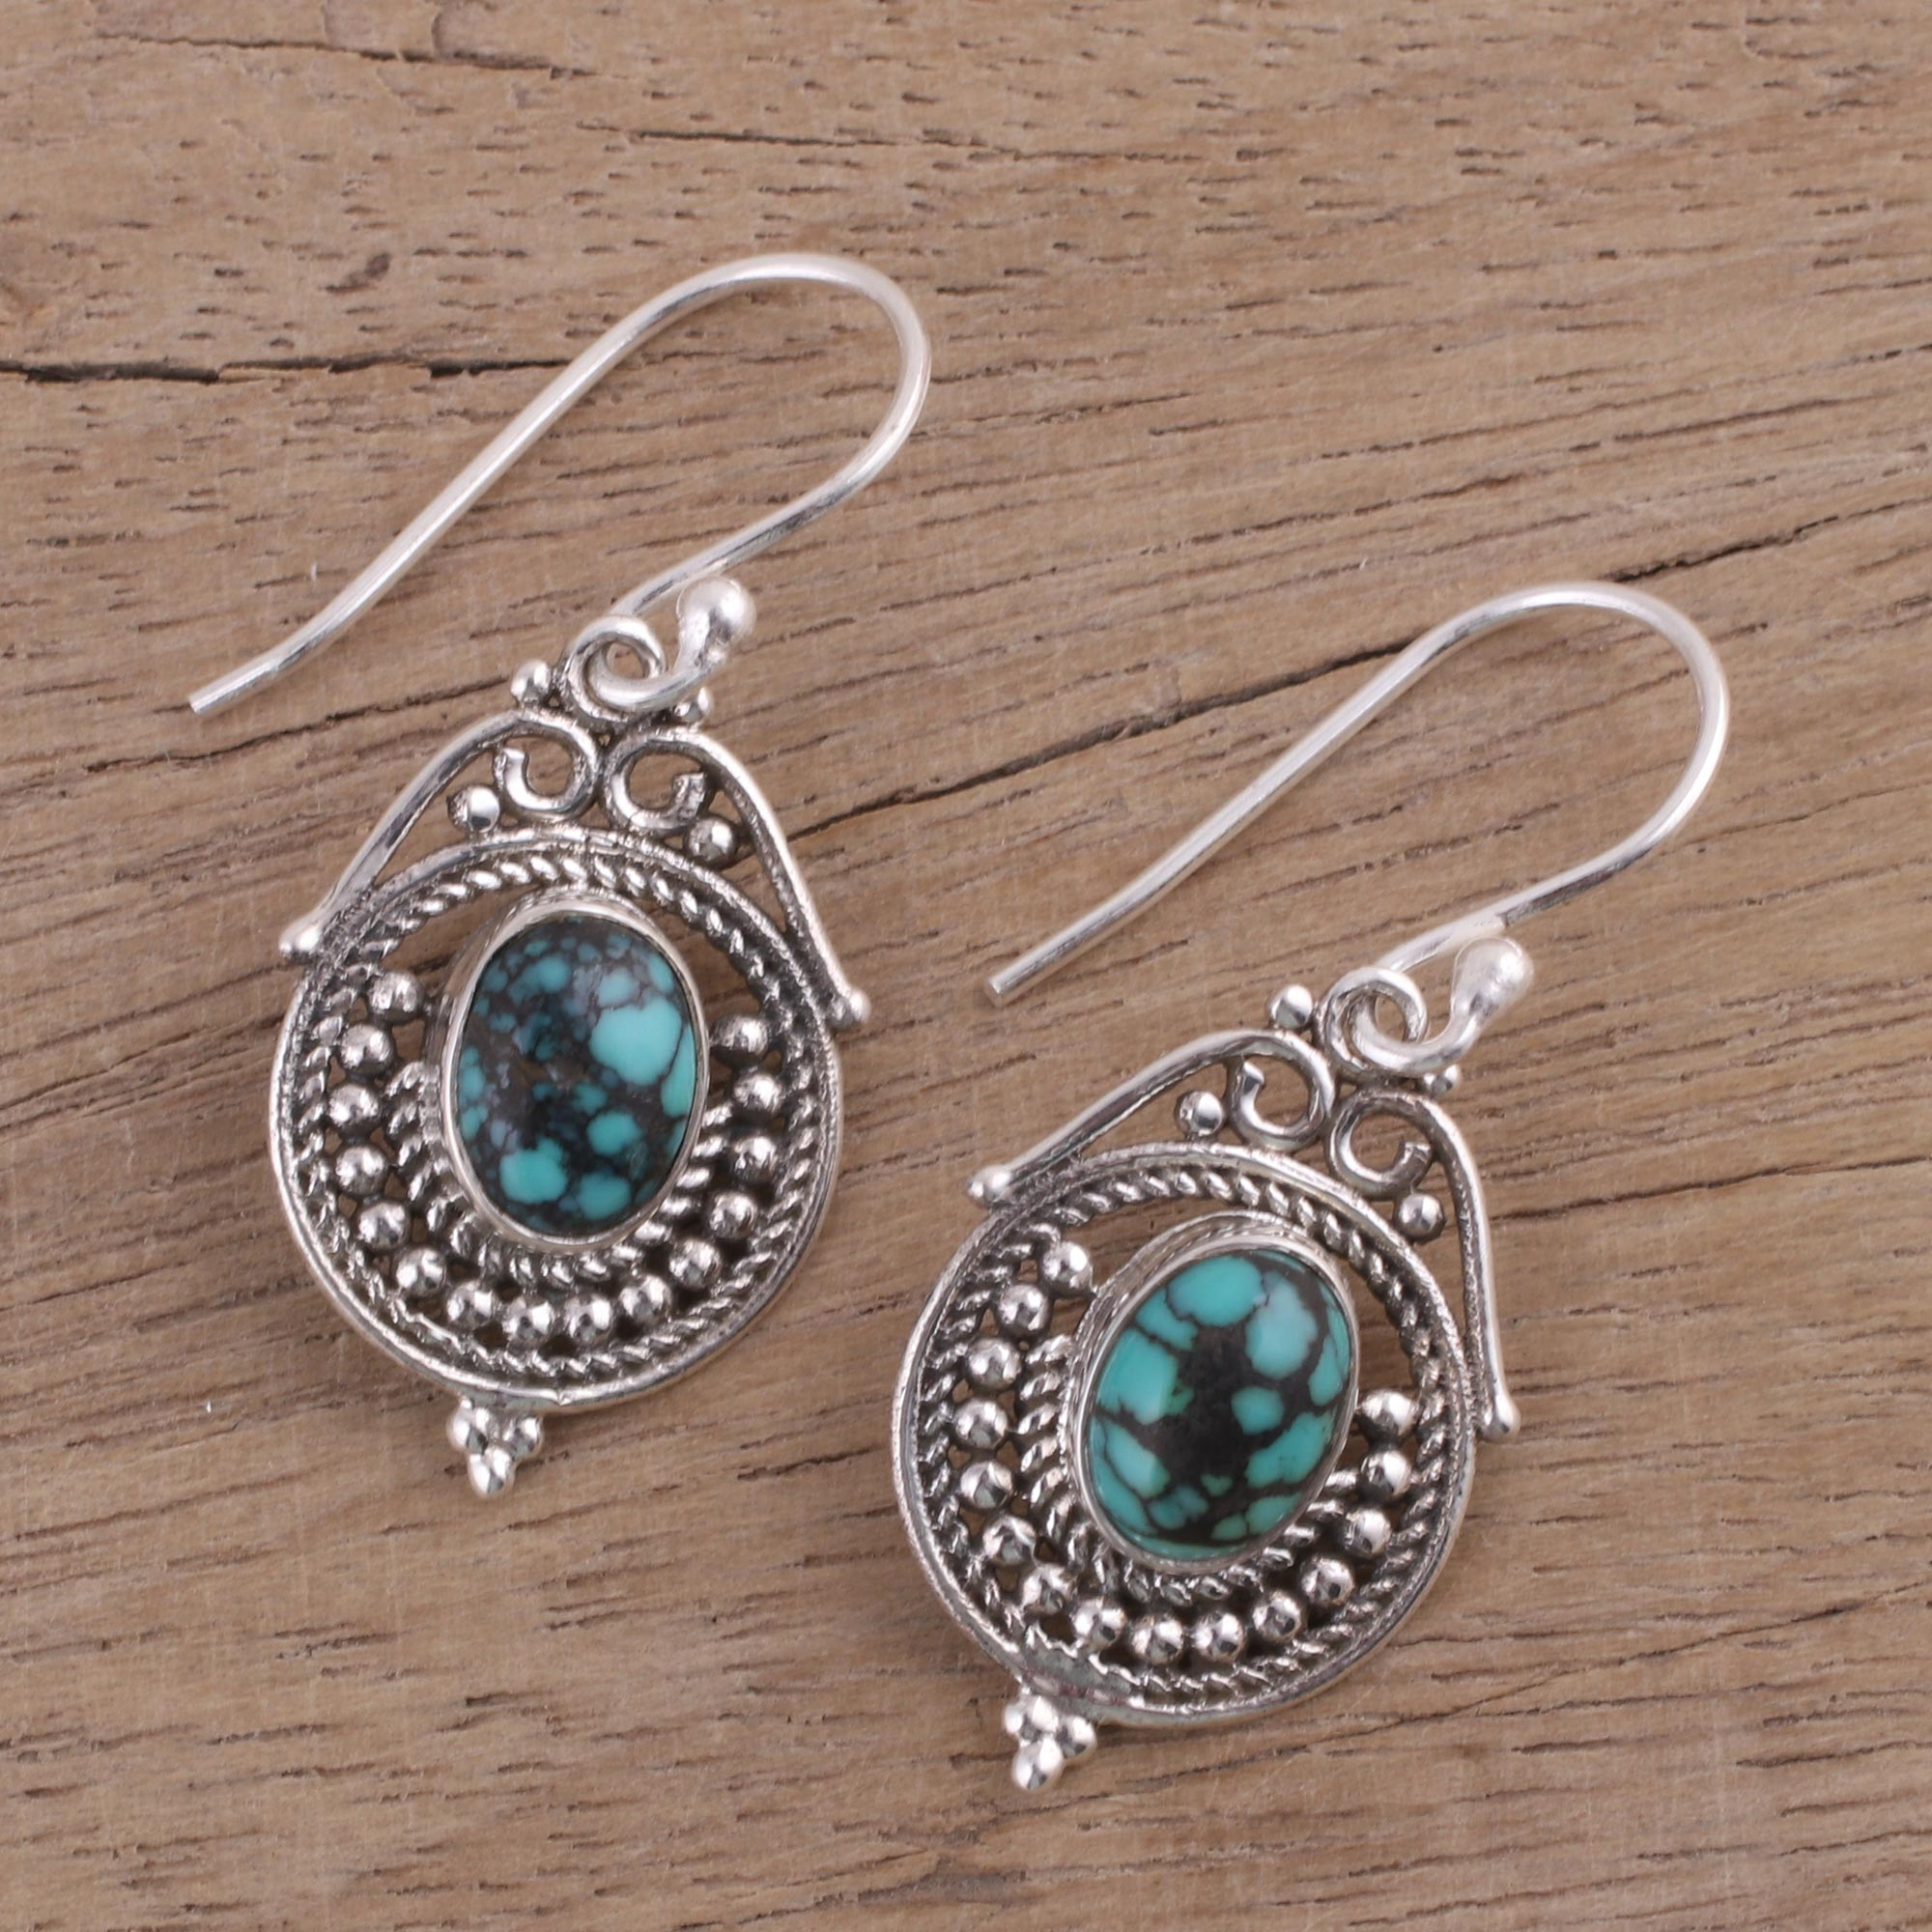 Sterling Silver and Composite Turquoise Earrings from India - Majestic ...